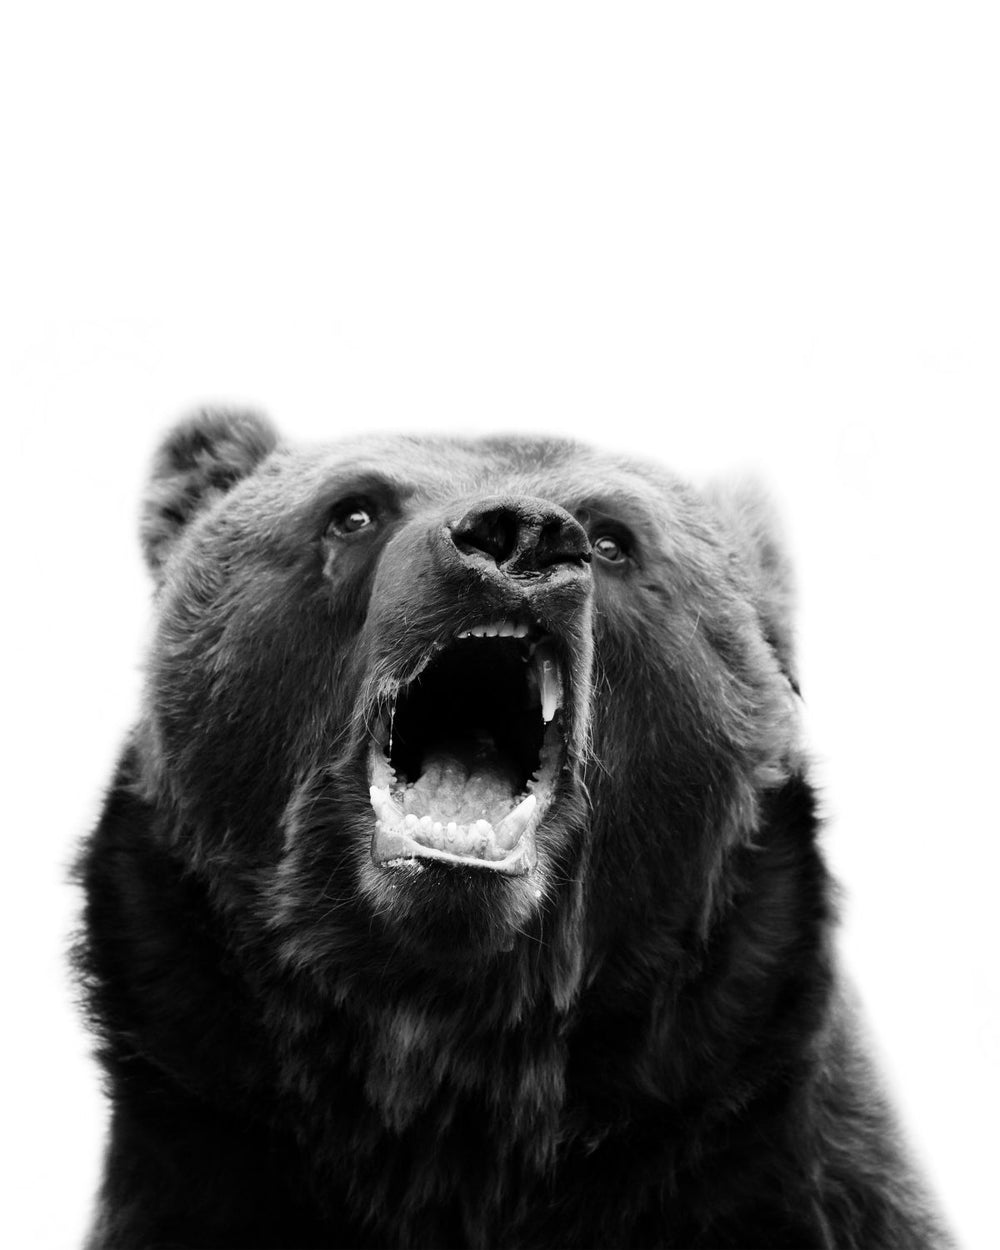 Snarling Grizzly Bear